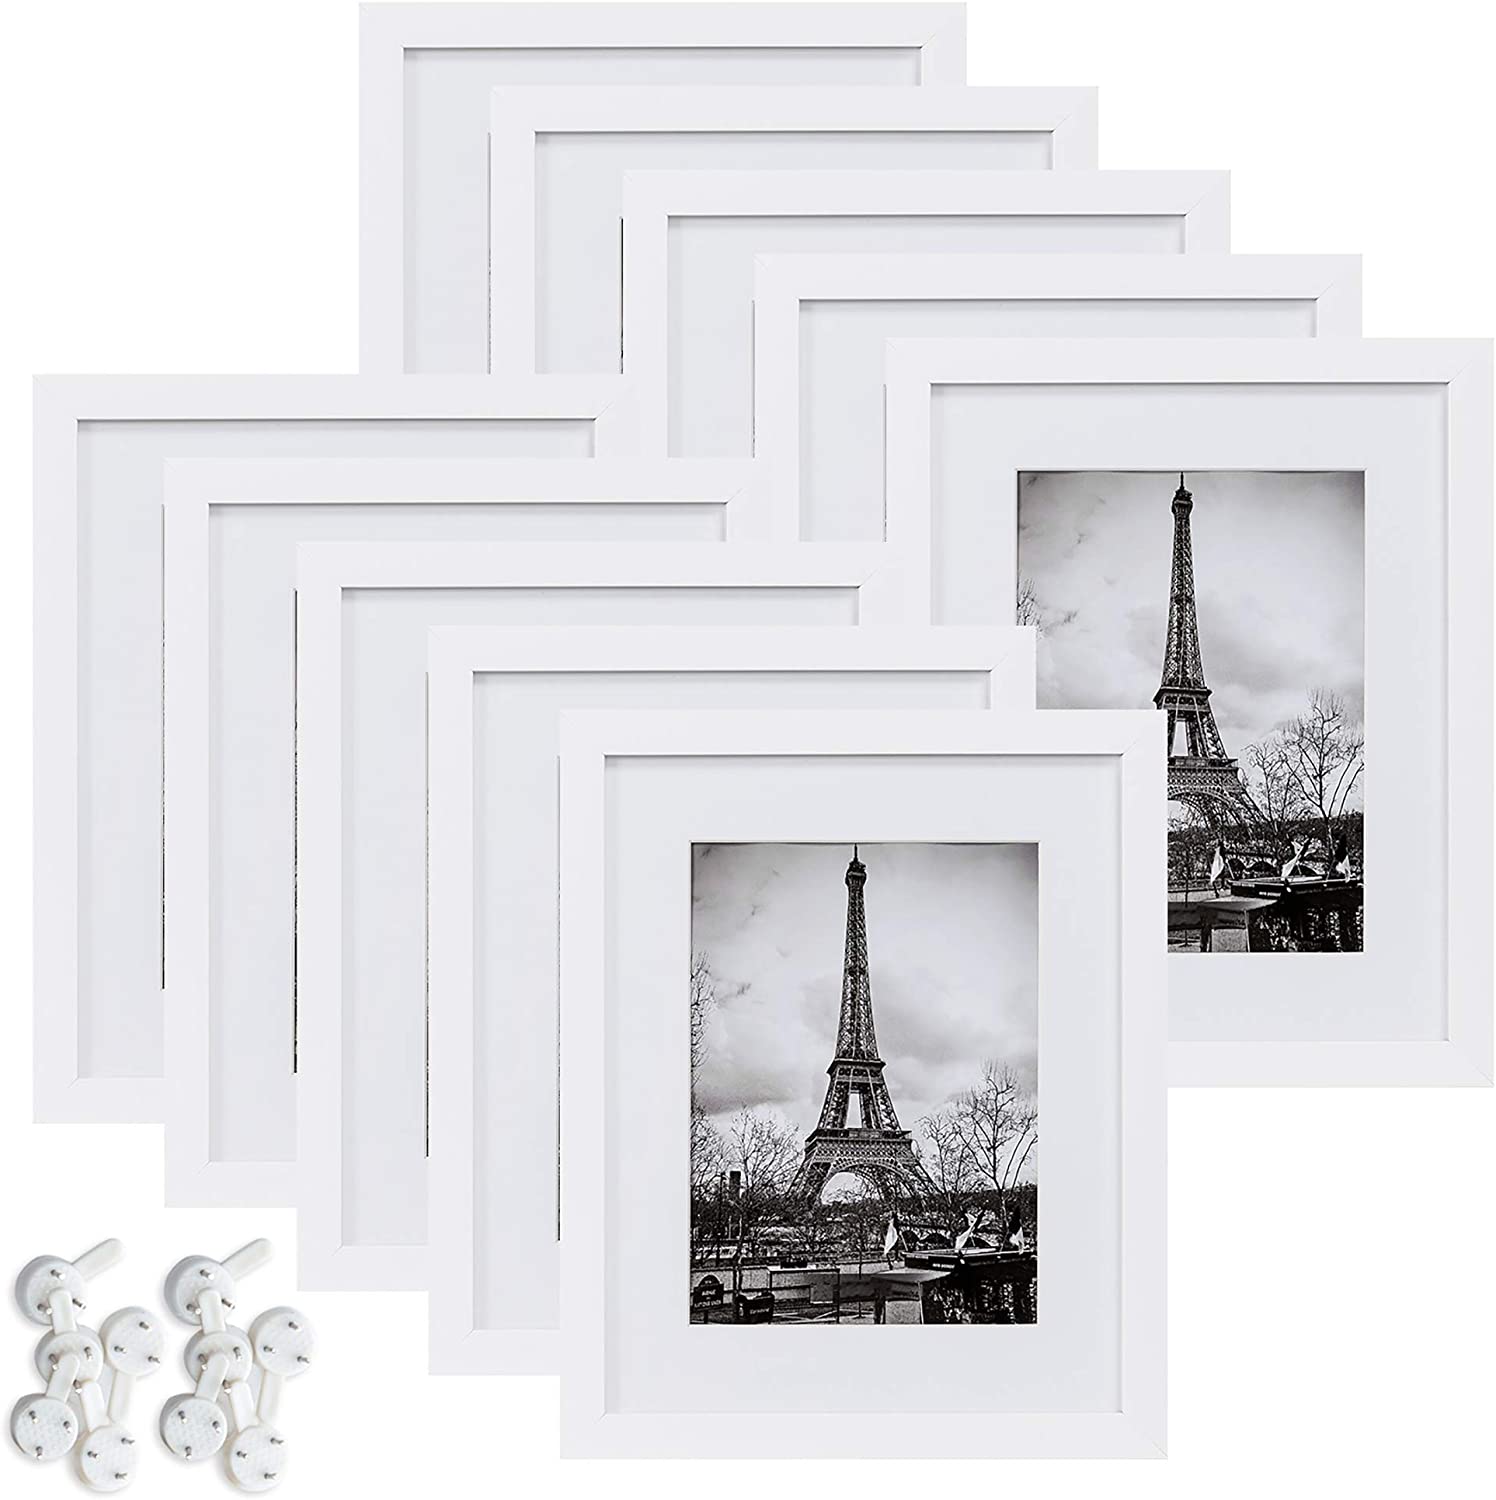 upsimples 8x10 Picture Frame Set of 2,Display Pictures 5x7 with Mat or 8x10  Without Mat,Wall Gallery Photo Frames,Black